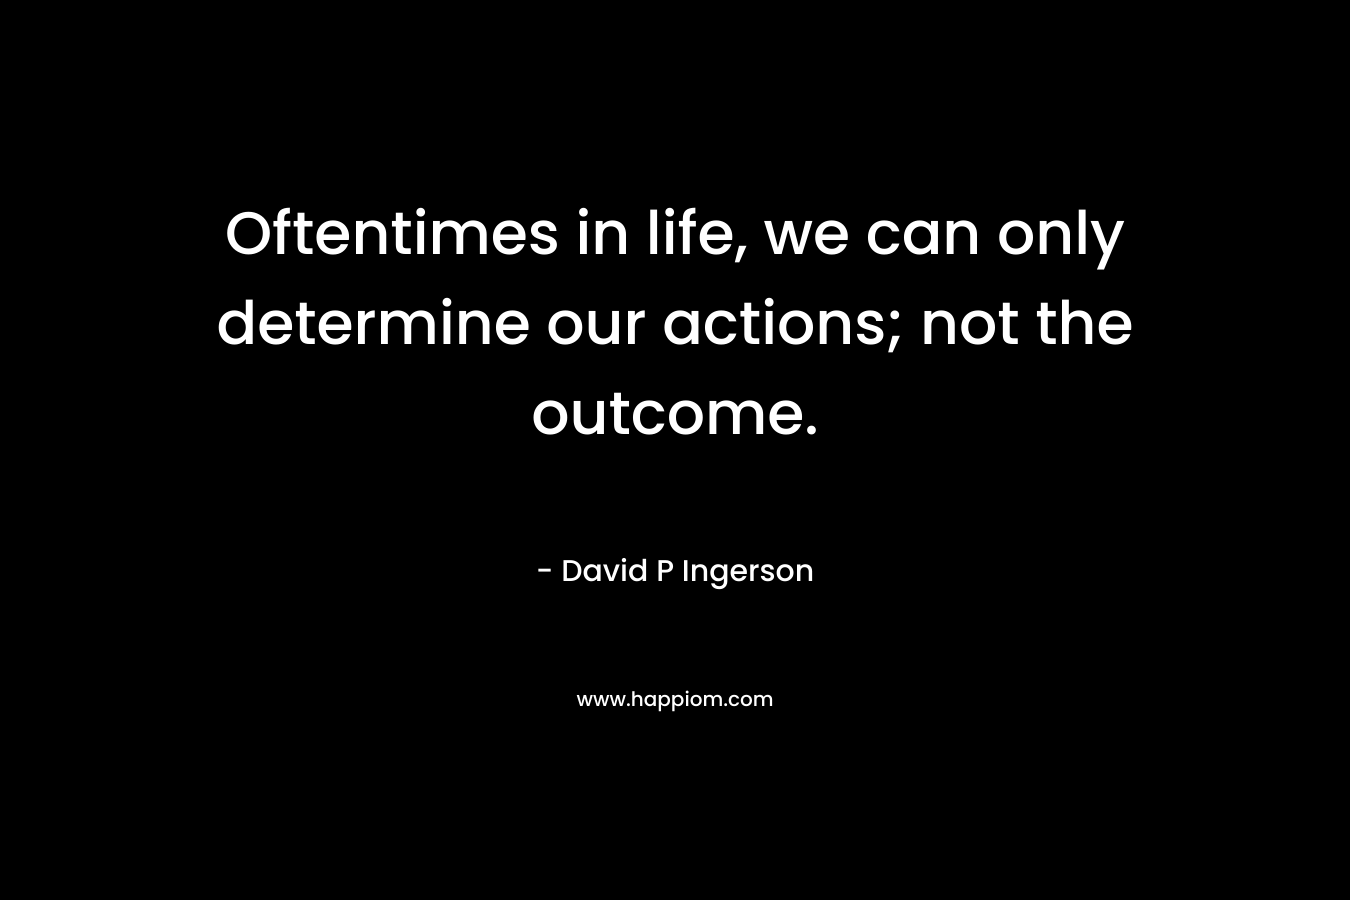 Oftentimes in life, we can only determine our actions; not the outcome.